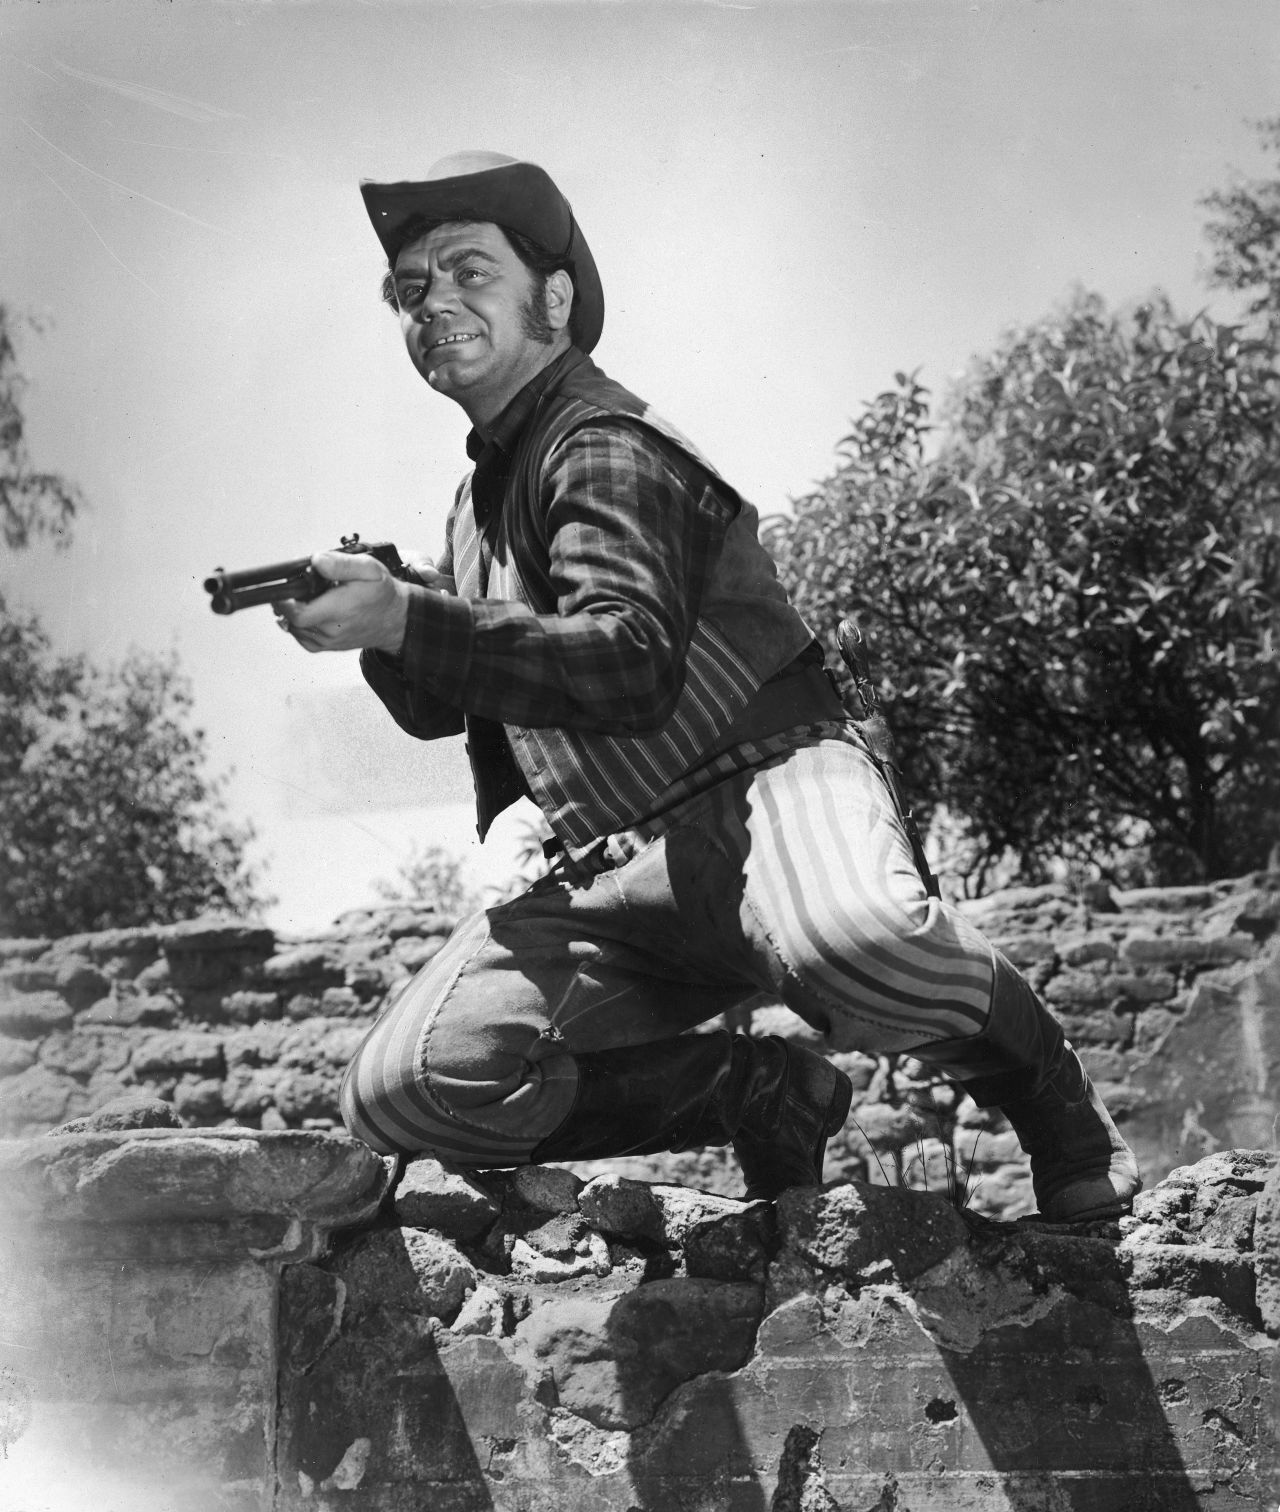 Ernest Borgnine steadies his rifle while acting in a Western film circa 1955.